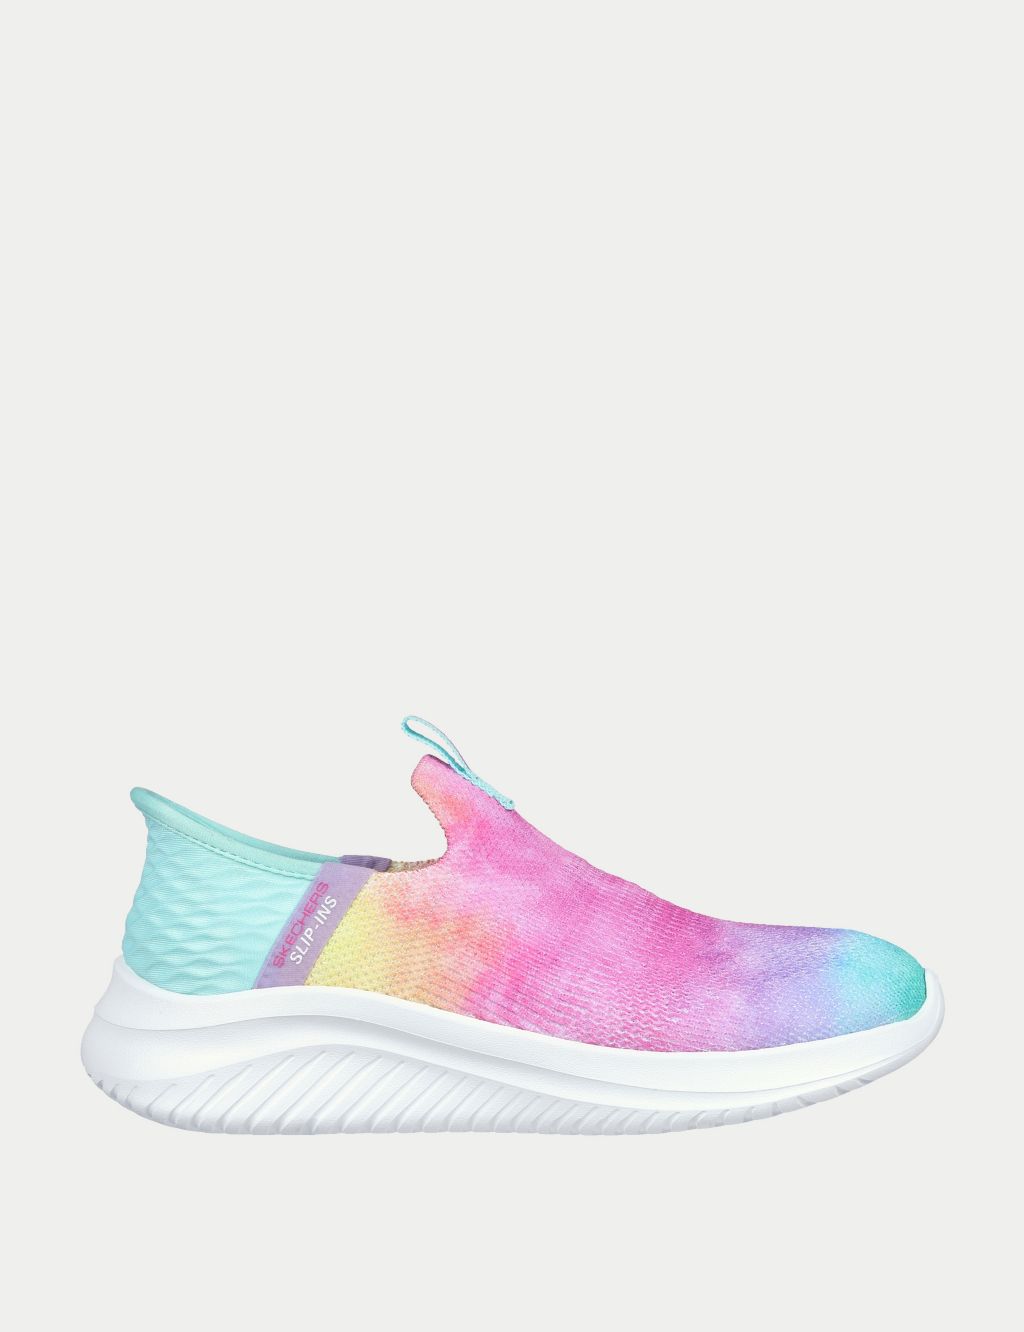 Rainbow Slip-ins Trainers (9.5 Small - 5 Large)